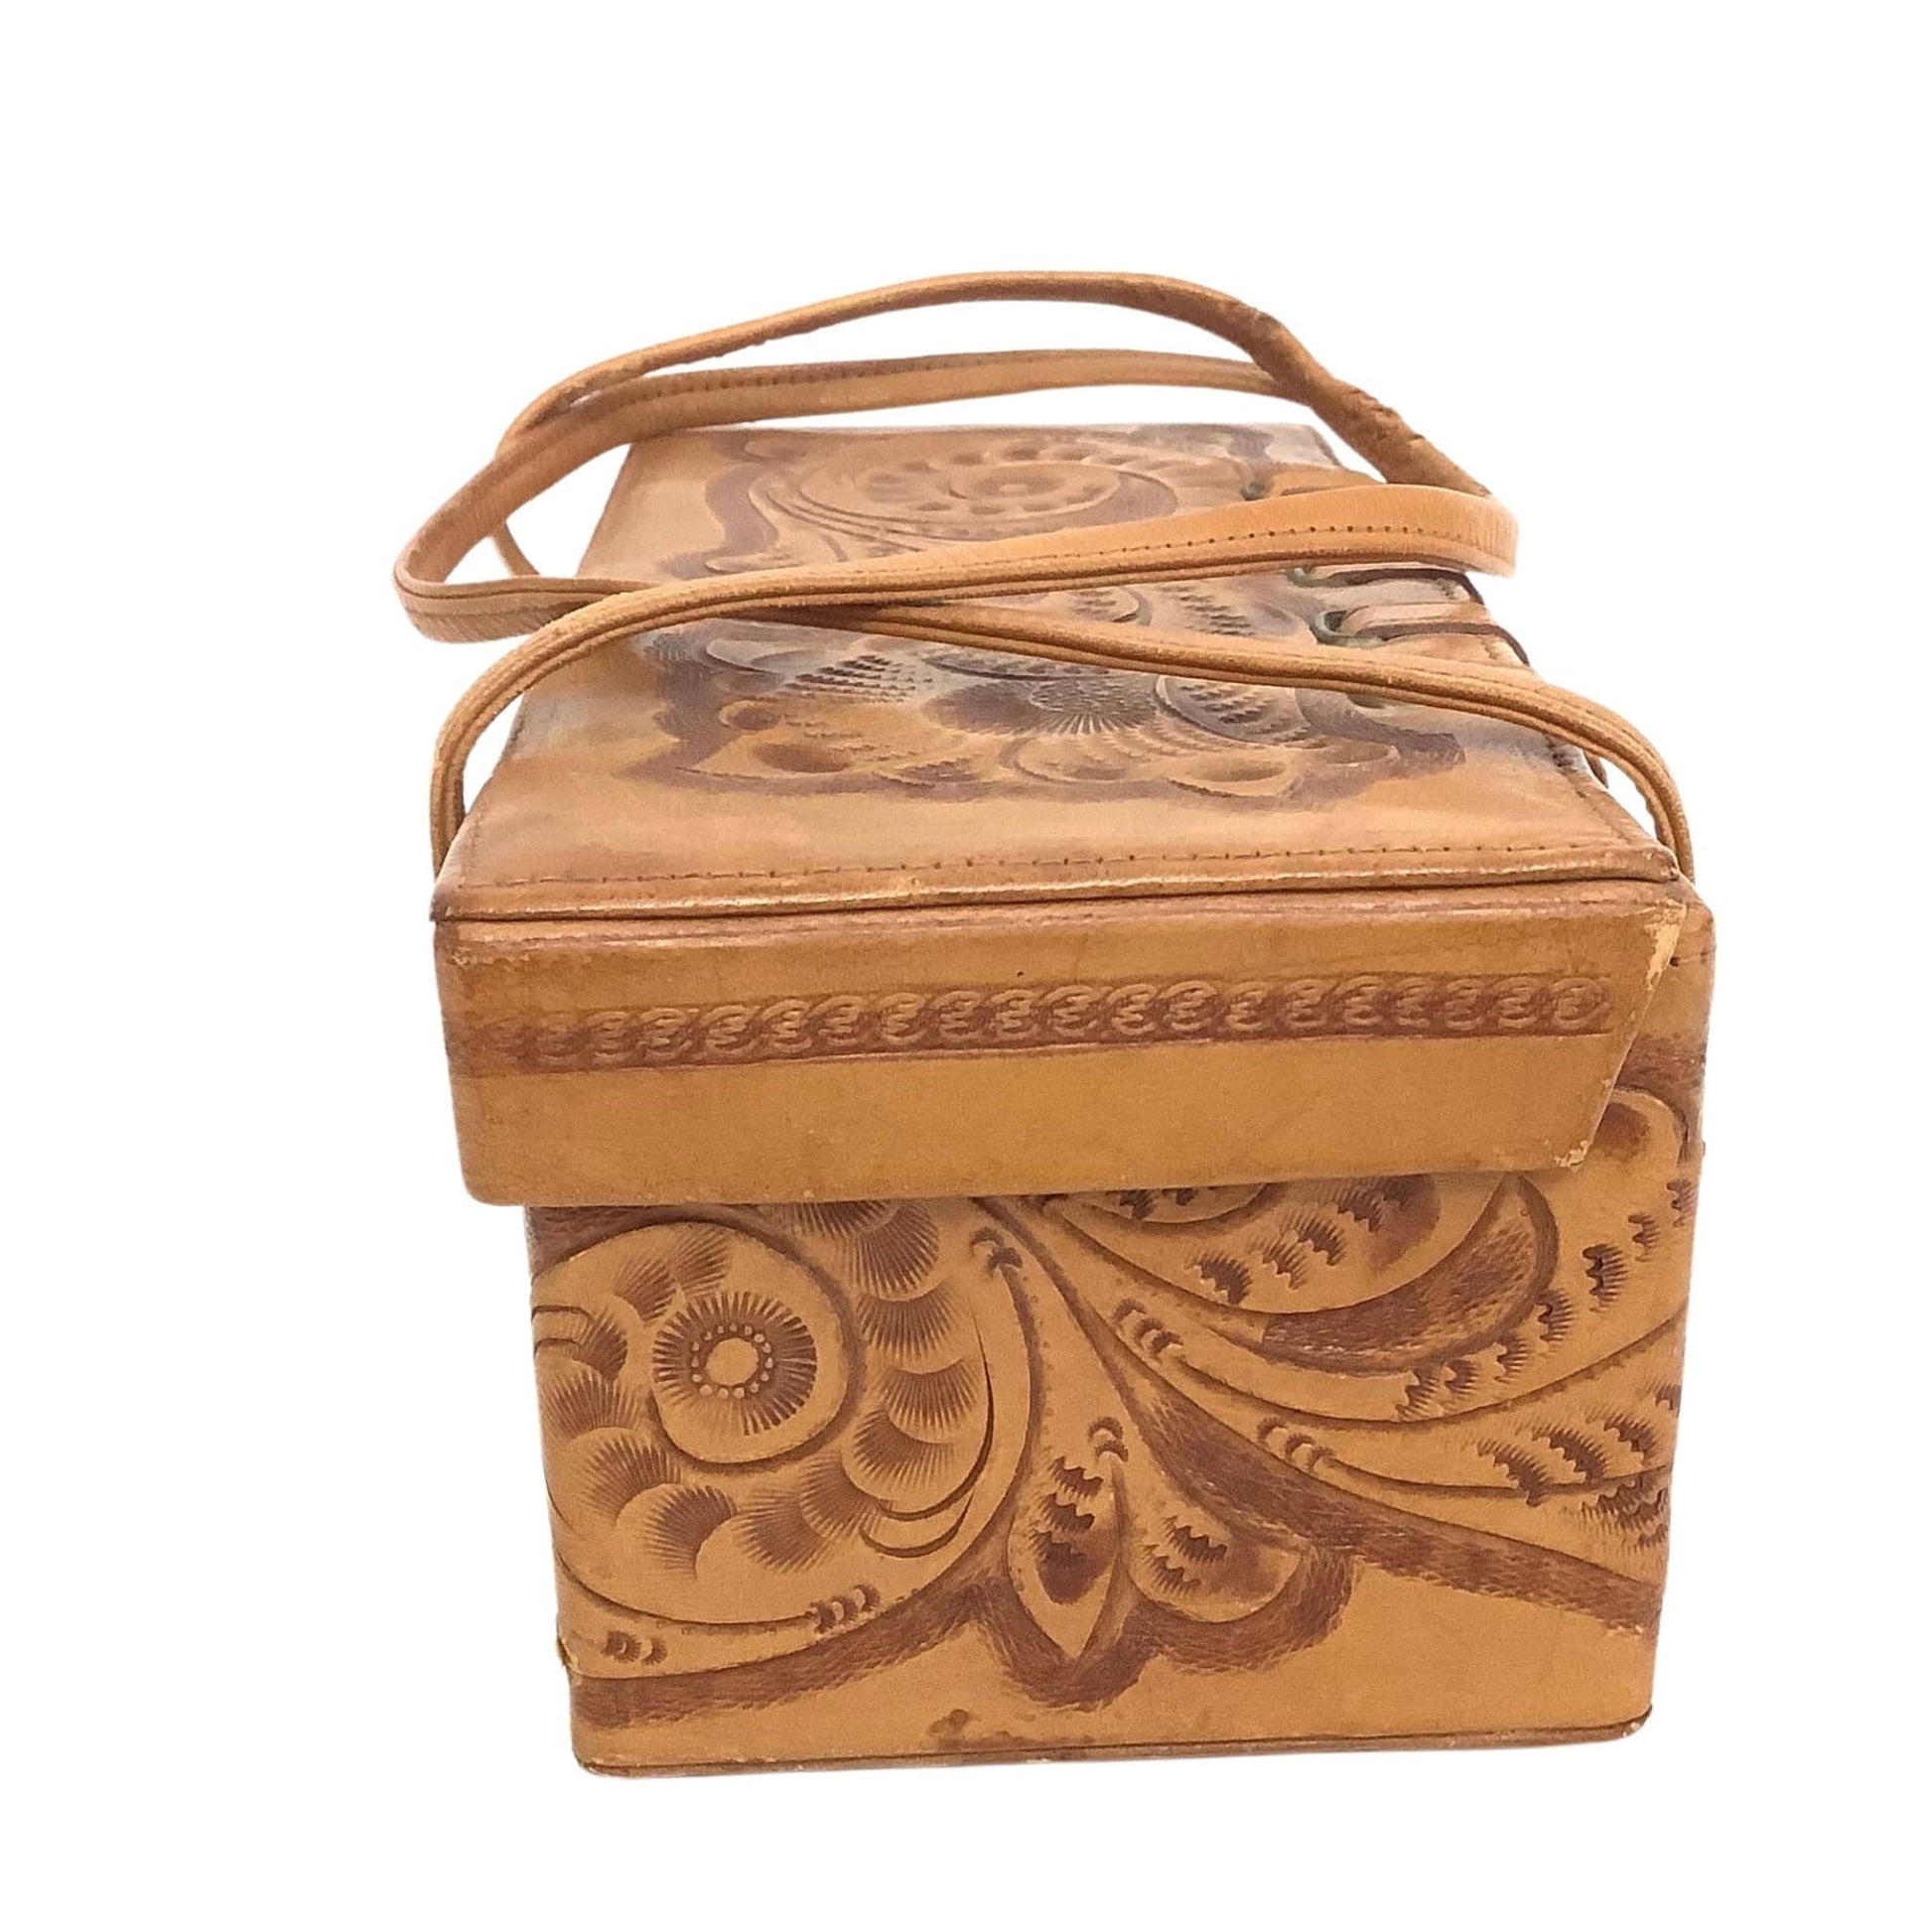 Tooled Leather Box Bag Tan / Leather / Vintage 1930s